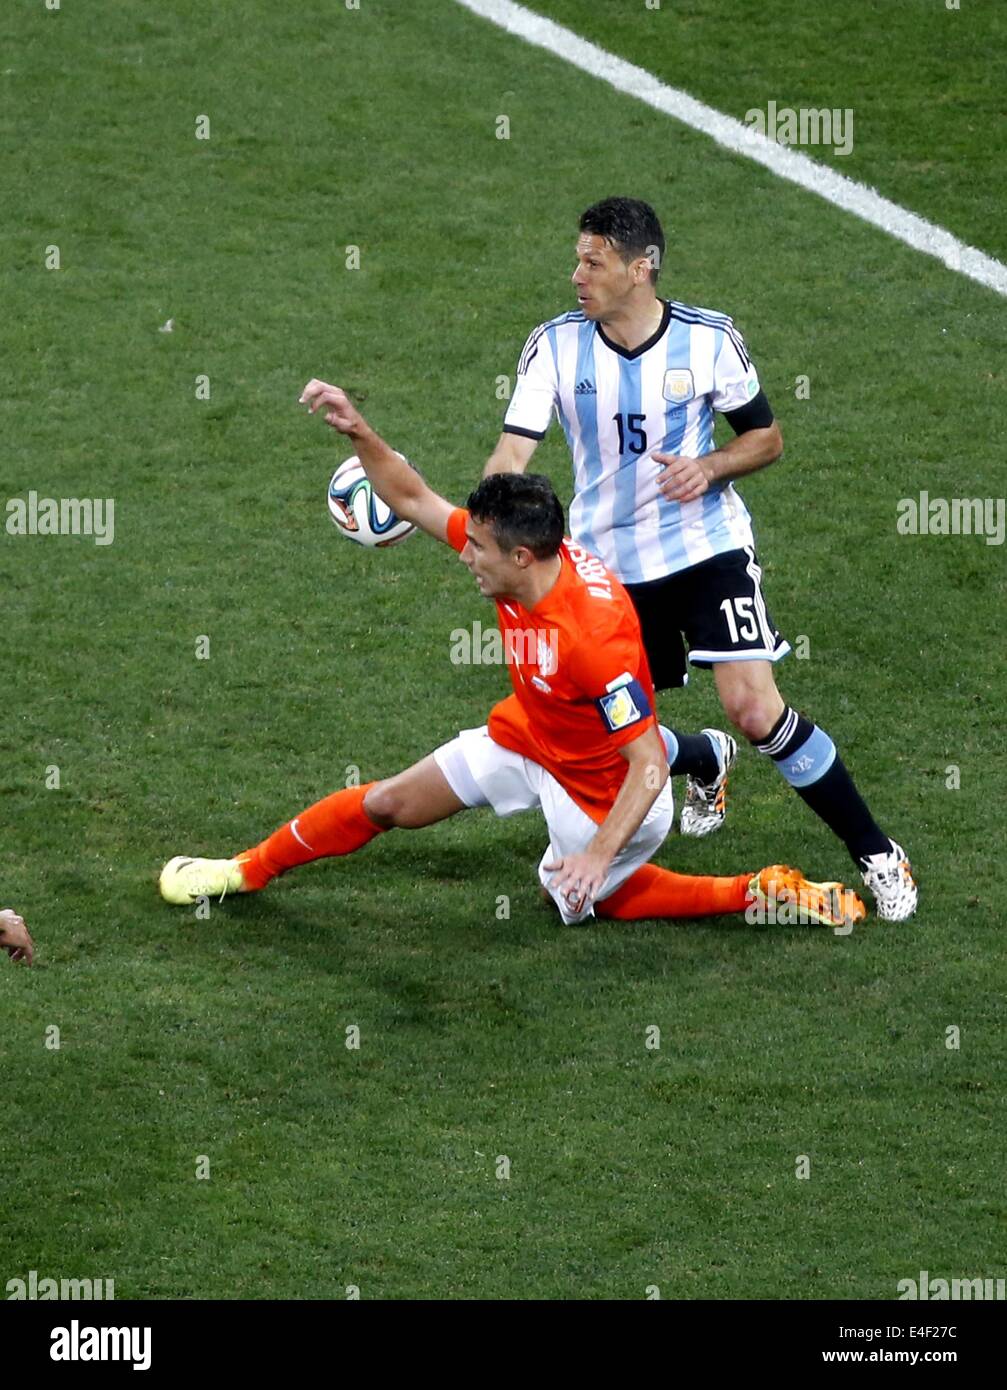 Sao Paulo, Brazil. 9th July, 2014. Netherlands' Robin van Persie vies with Argentina's Martin Demichelis during a semifinal match between Netherlands and Argentina of 2014 FIFA World Cup at the Arena de Sao Paulo Stadium in Sao Paulo, Brazil, on July 9, 2014. Credit:  Liao Yujie/Xinhua/Alamy Live News Stock Photo